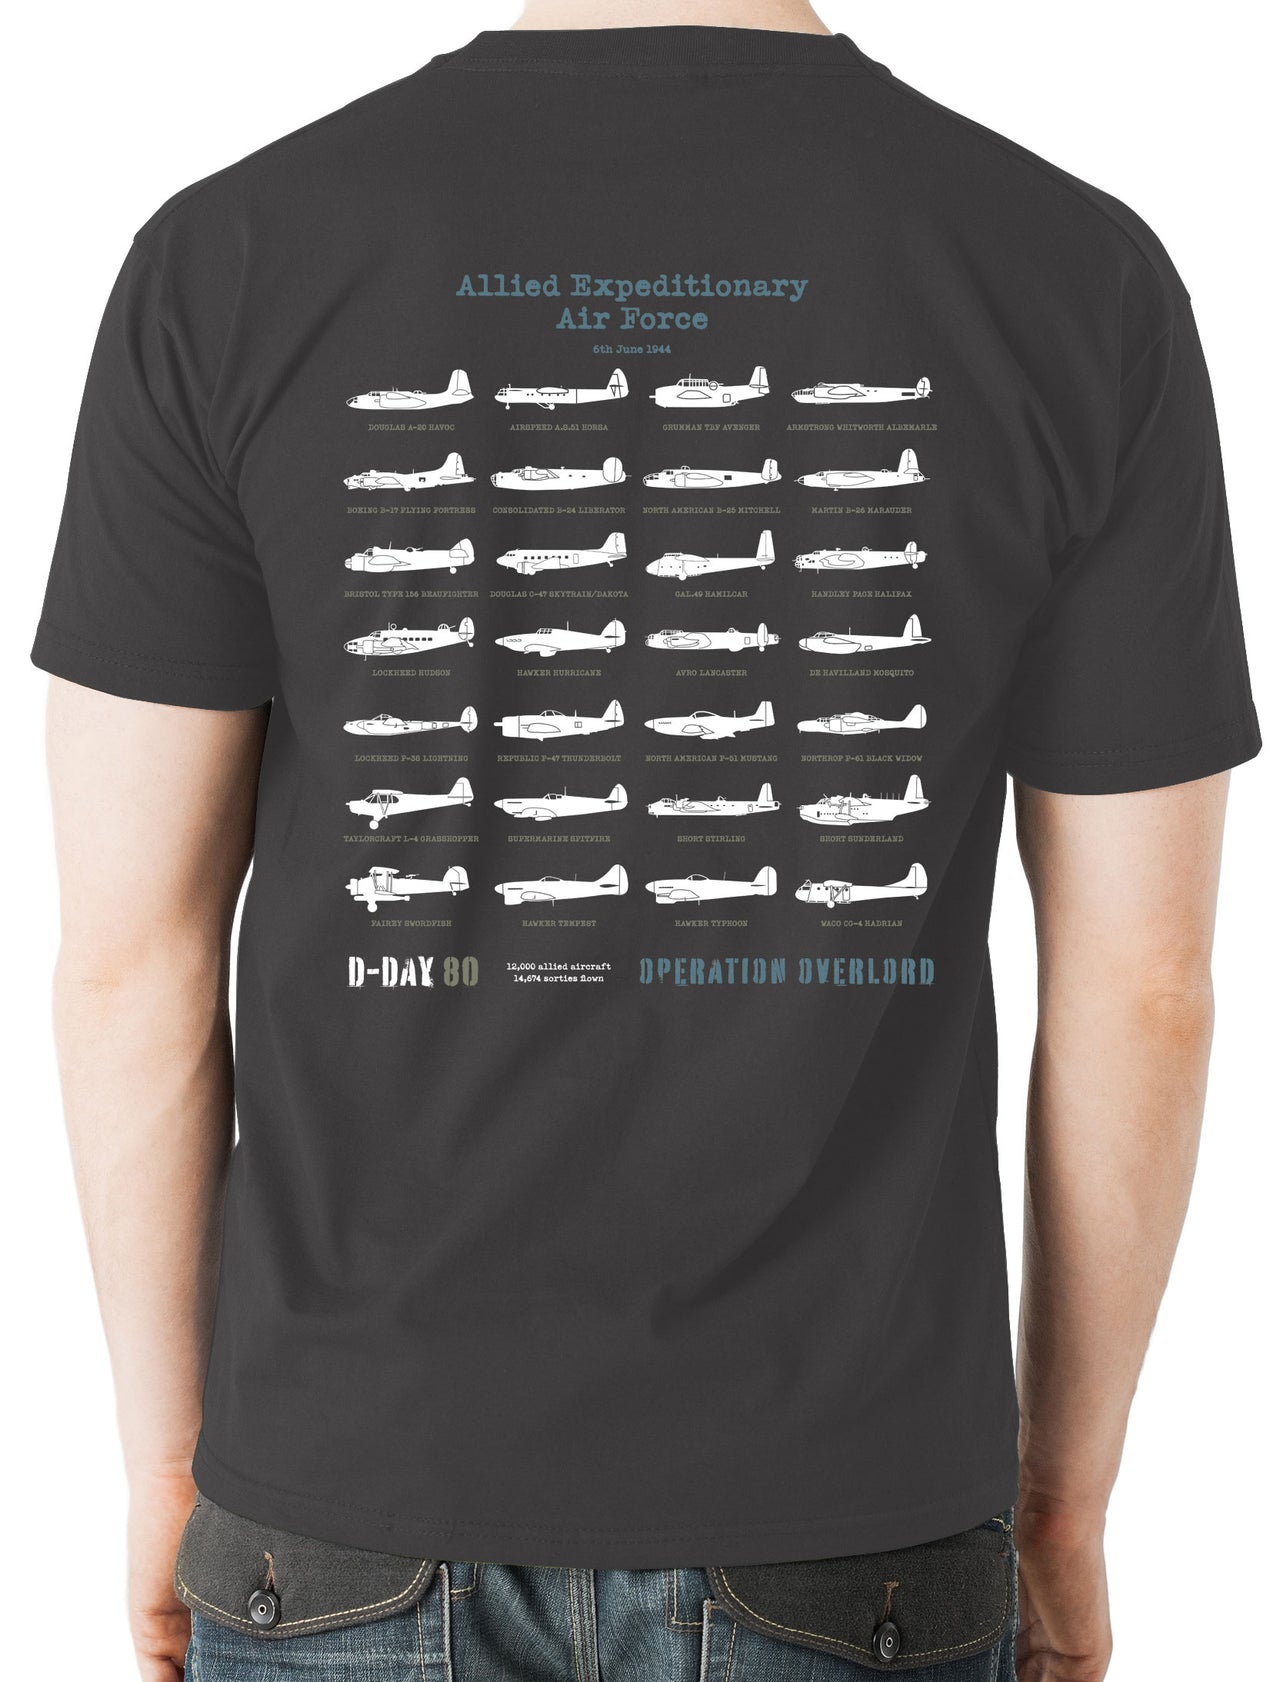 D-Day Stirling - T-shirt